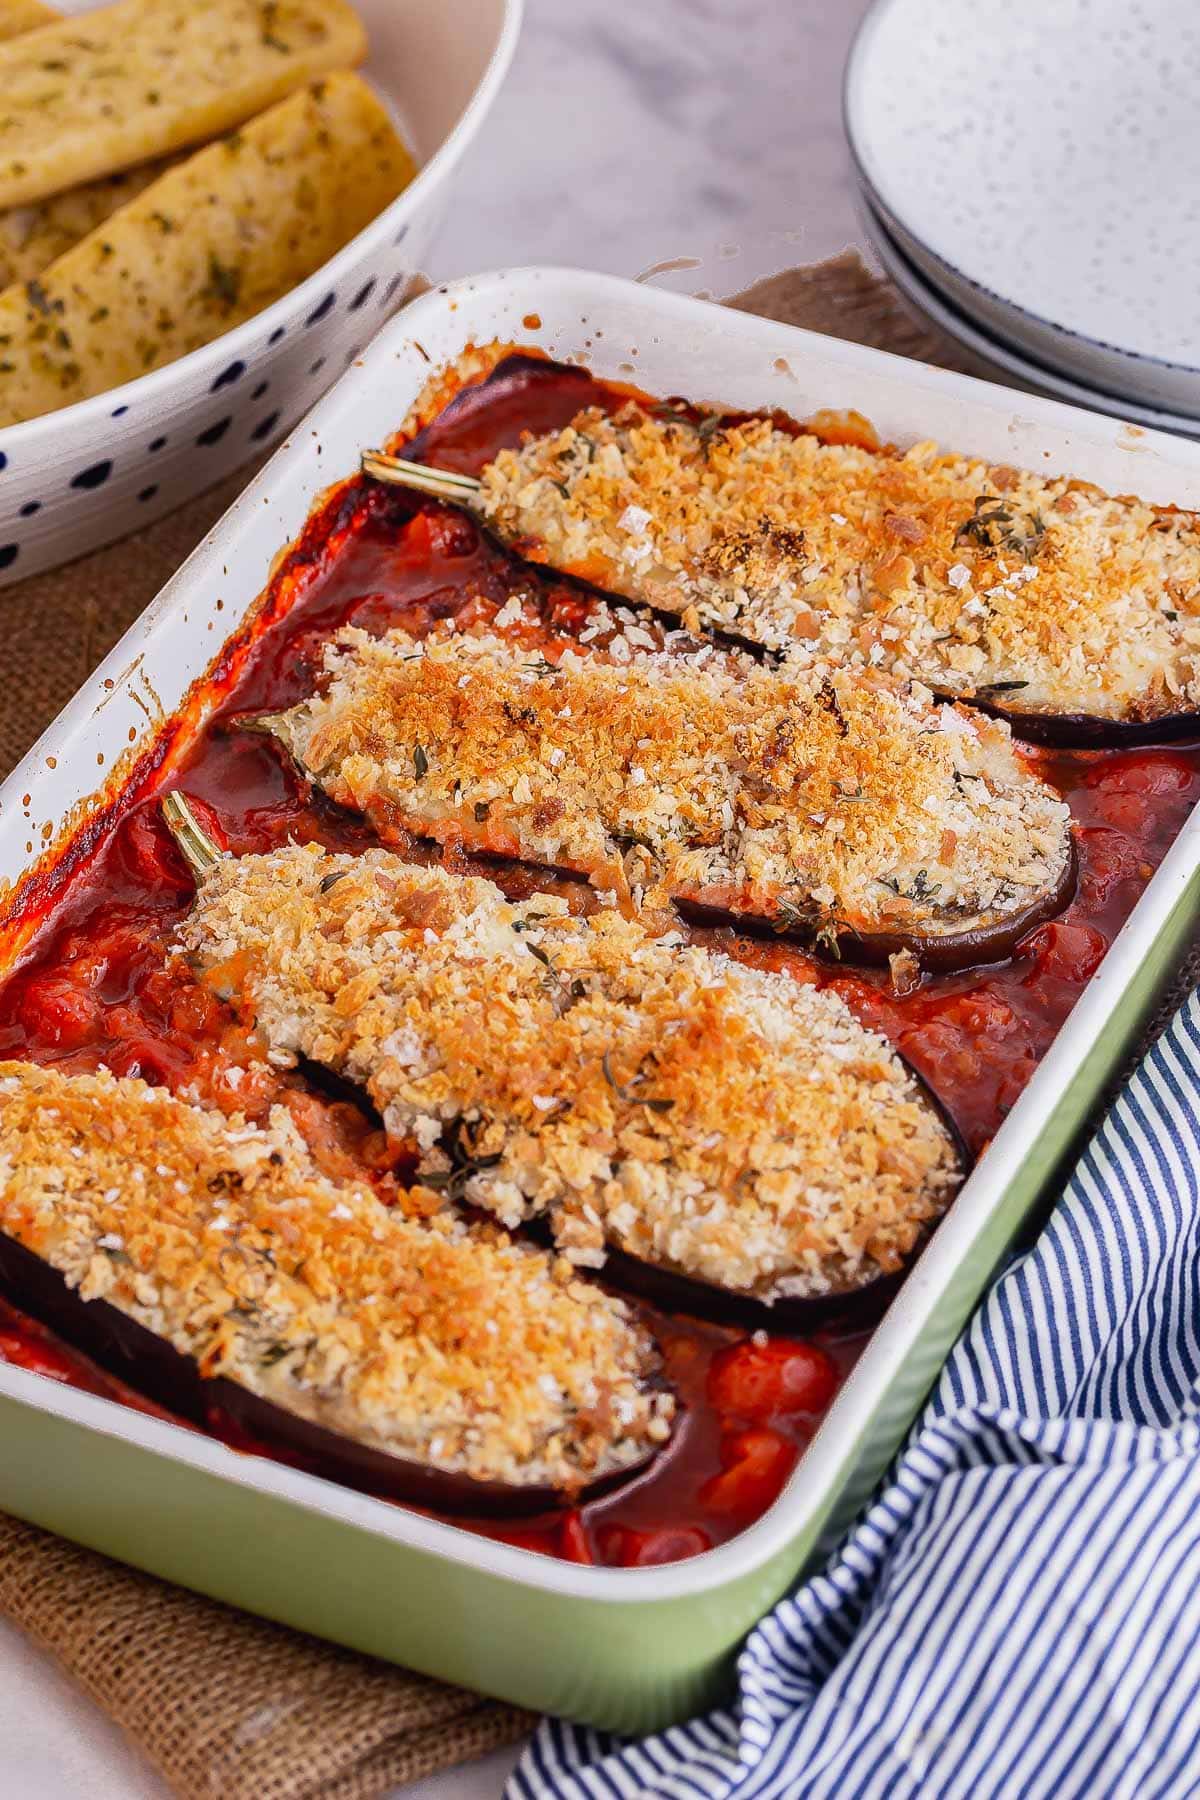 Green baking dish with cheesy roasted aubergines and tomato sauce